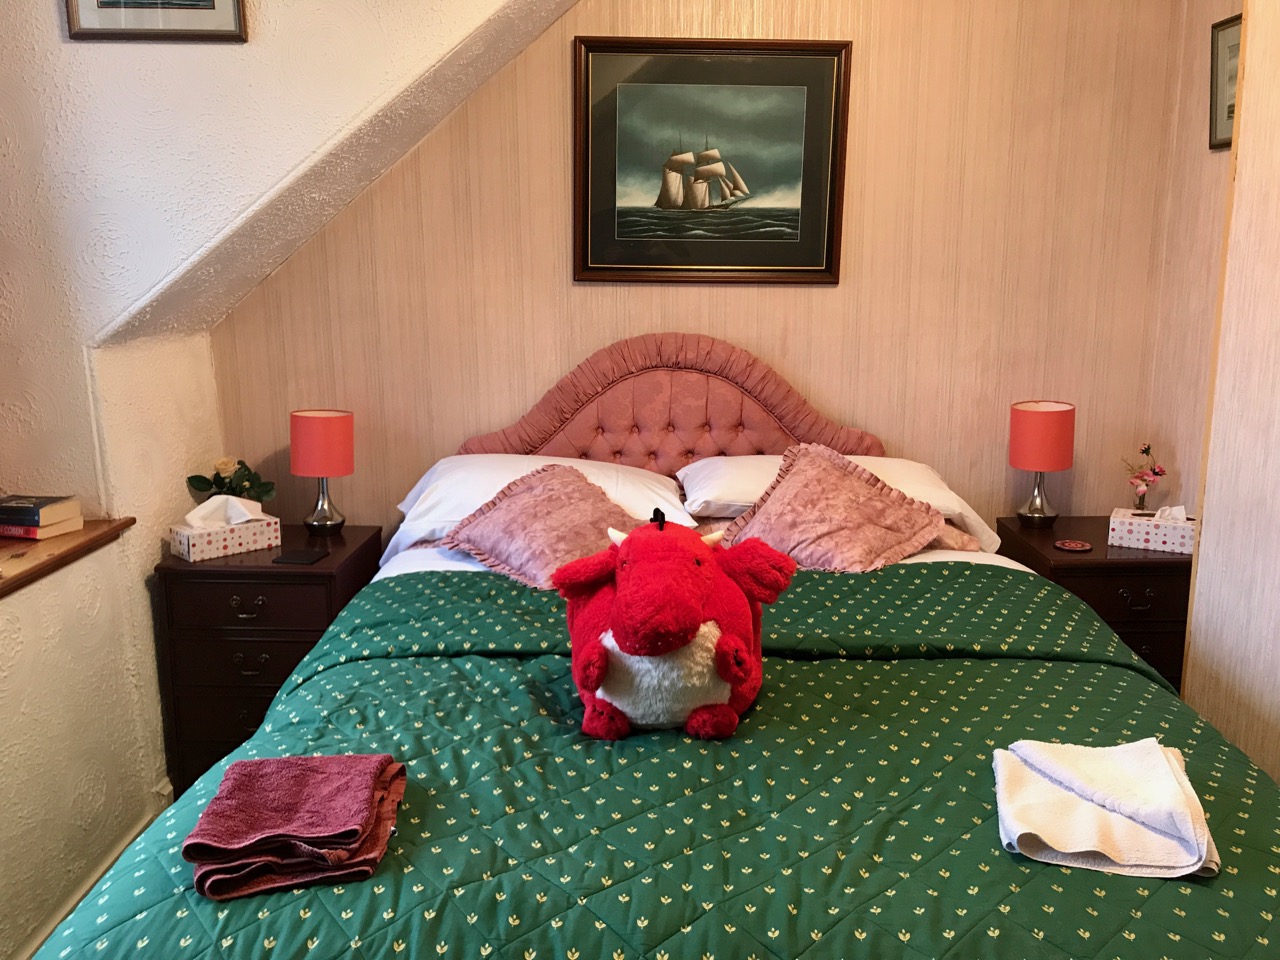 Bedroom with dragon